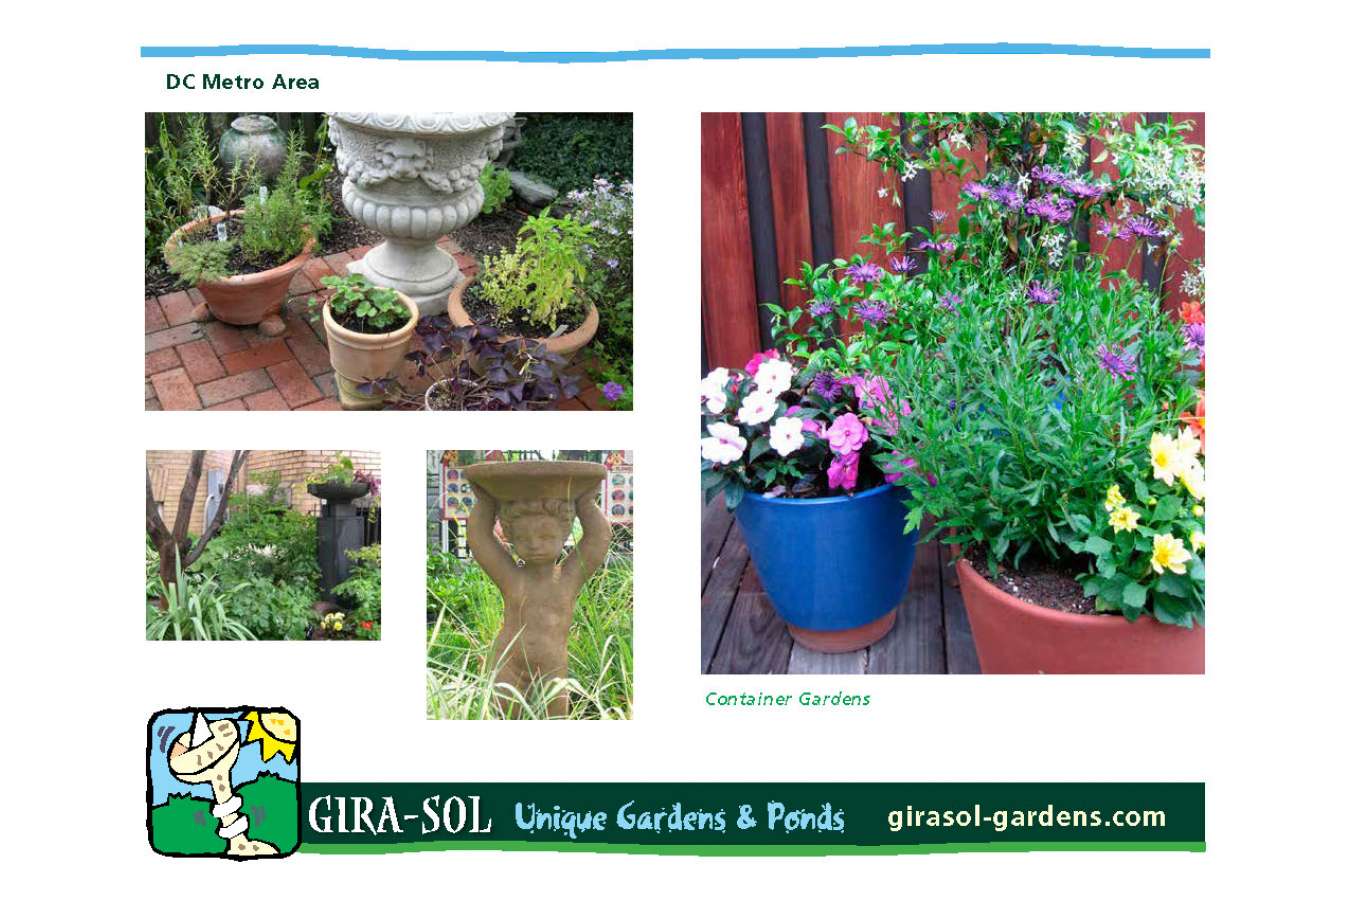 Girasol 8.5 x 11 book 16_Page_03 : Page from specialties flip book showing container gardens